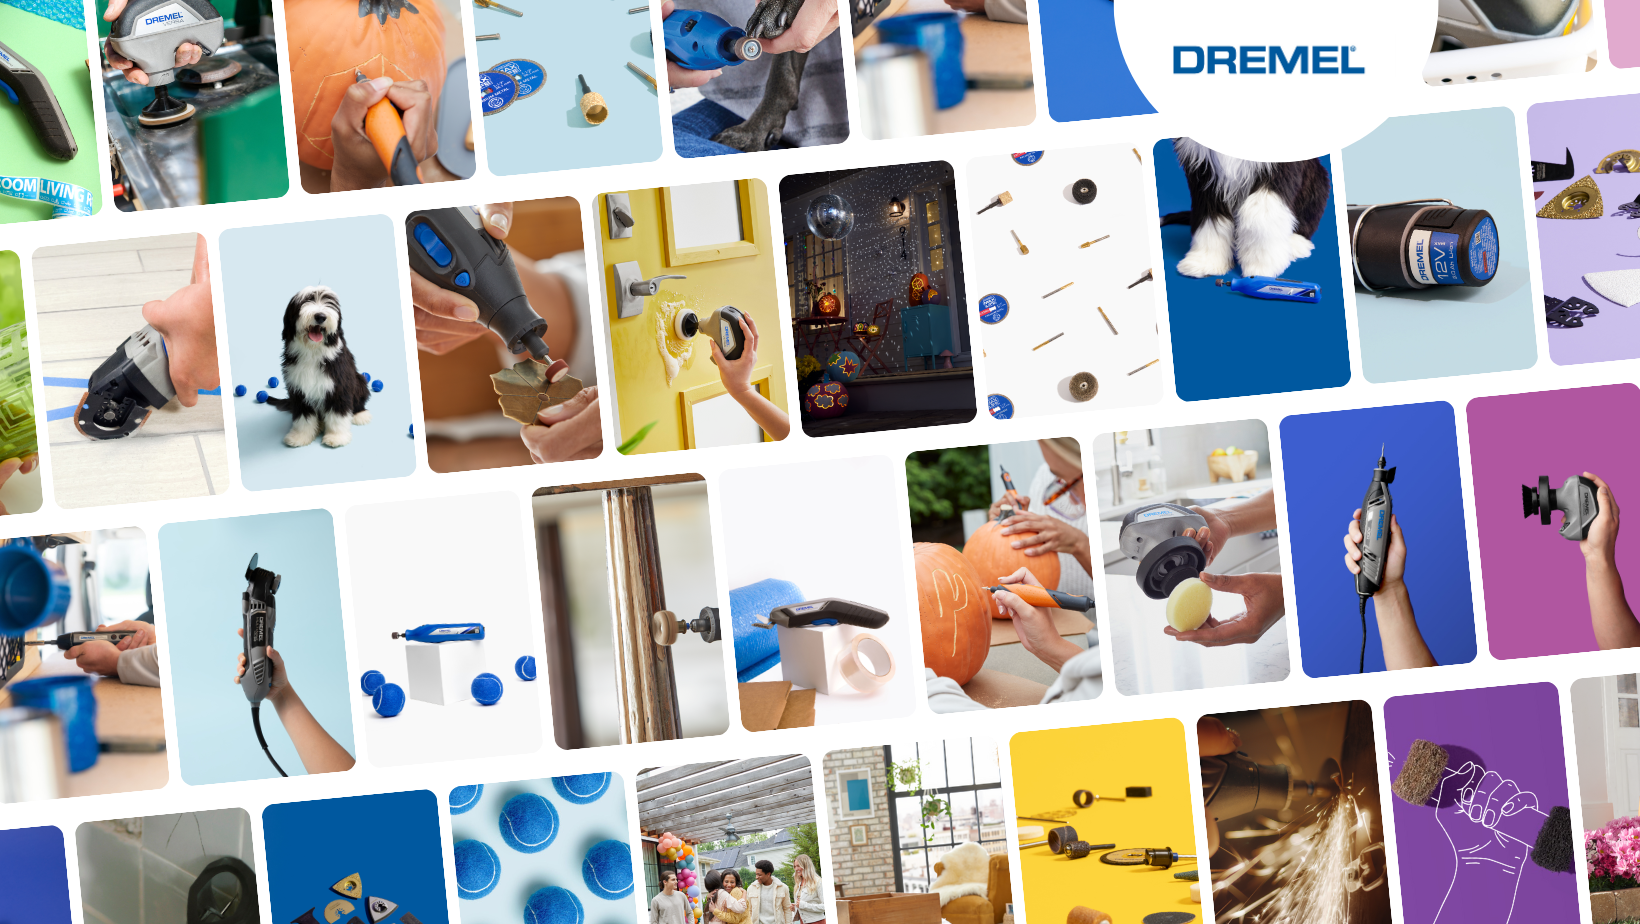 Dremel - STARTING NOW: Enter our Watch & Win Trivia! First, watch the  Instagram Stories of us setting up shop at Haven Conference. Second, tell  us: Out of the tools featured in